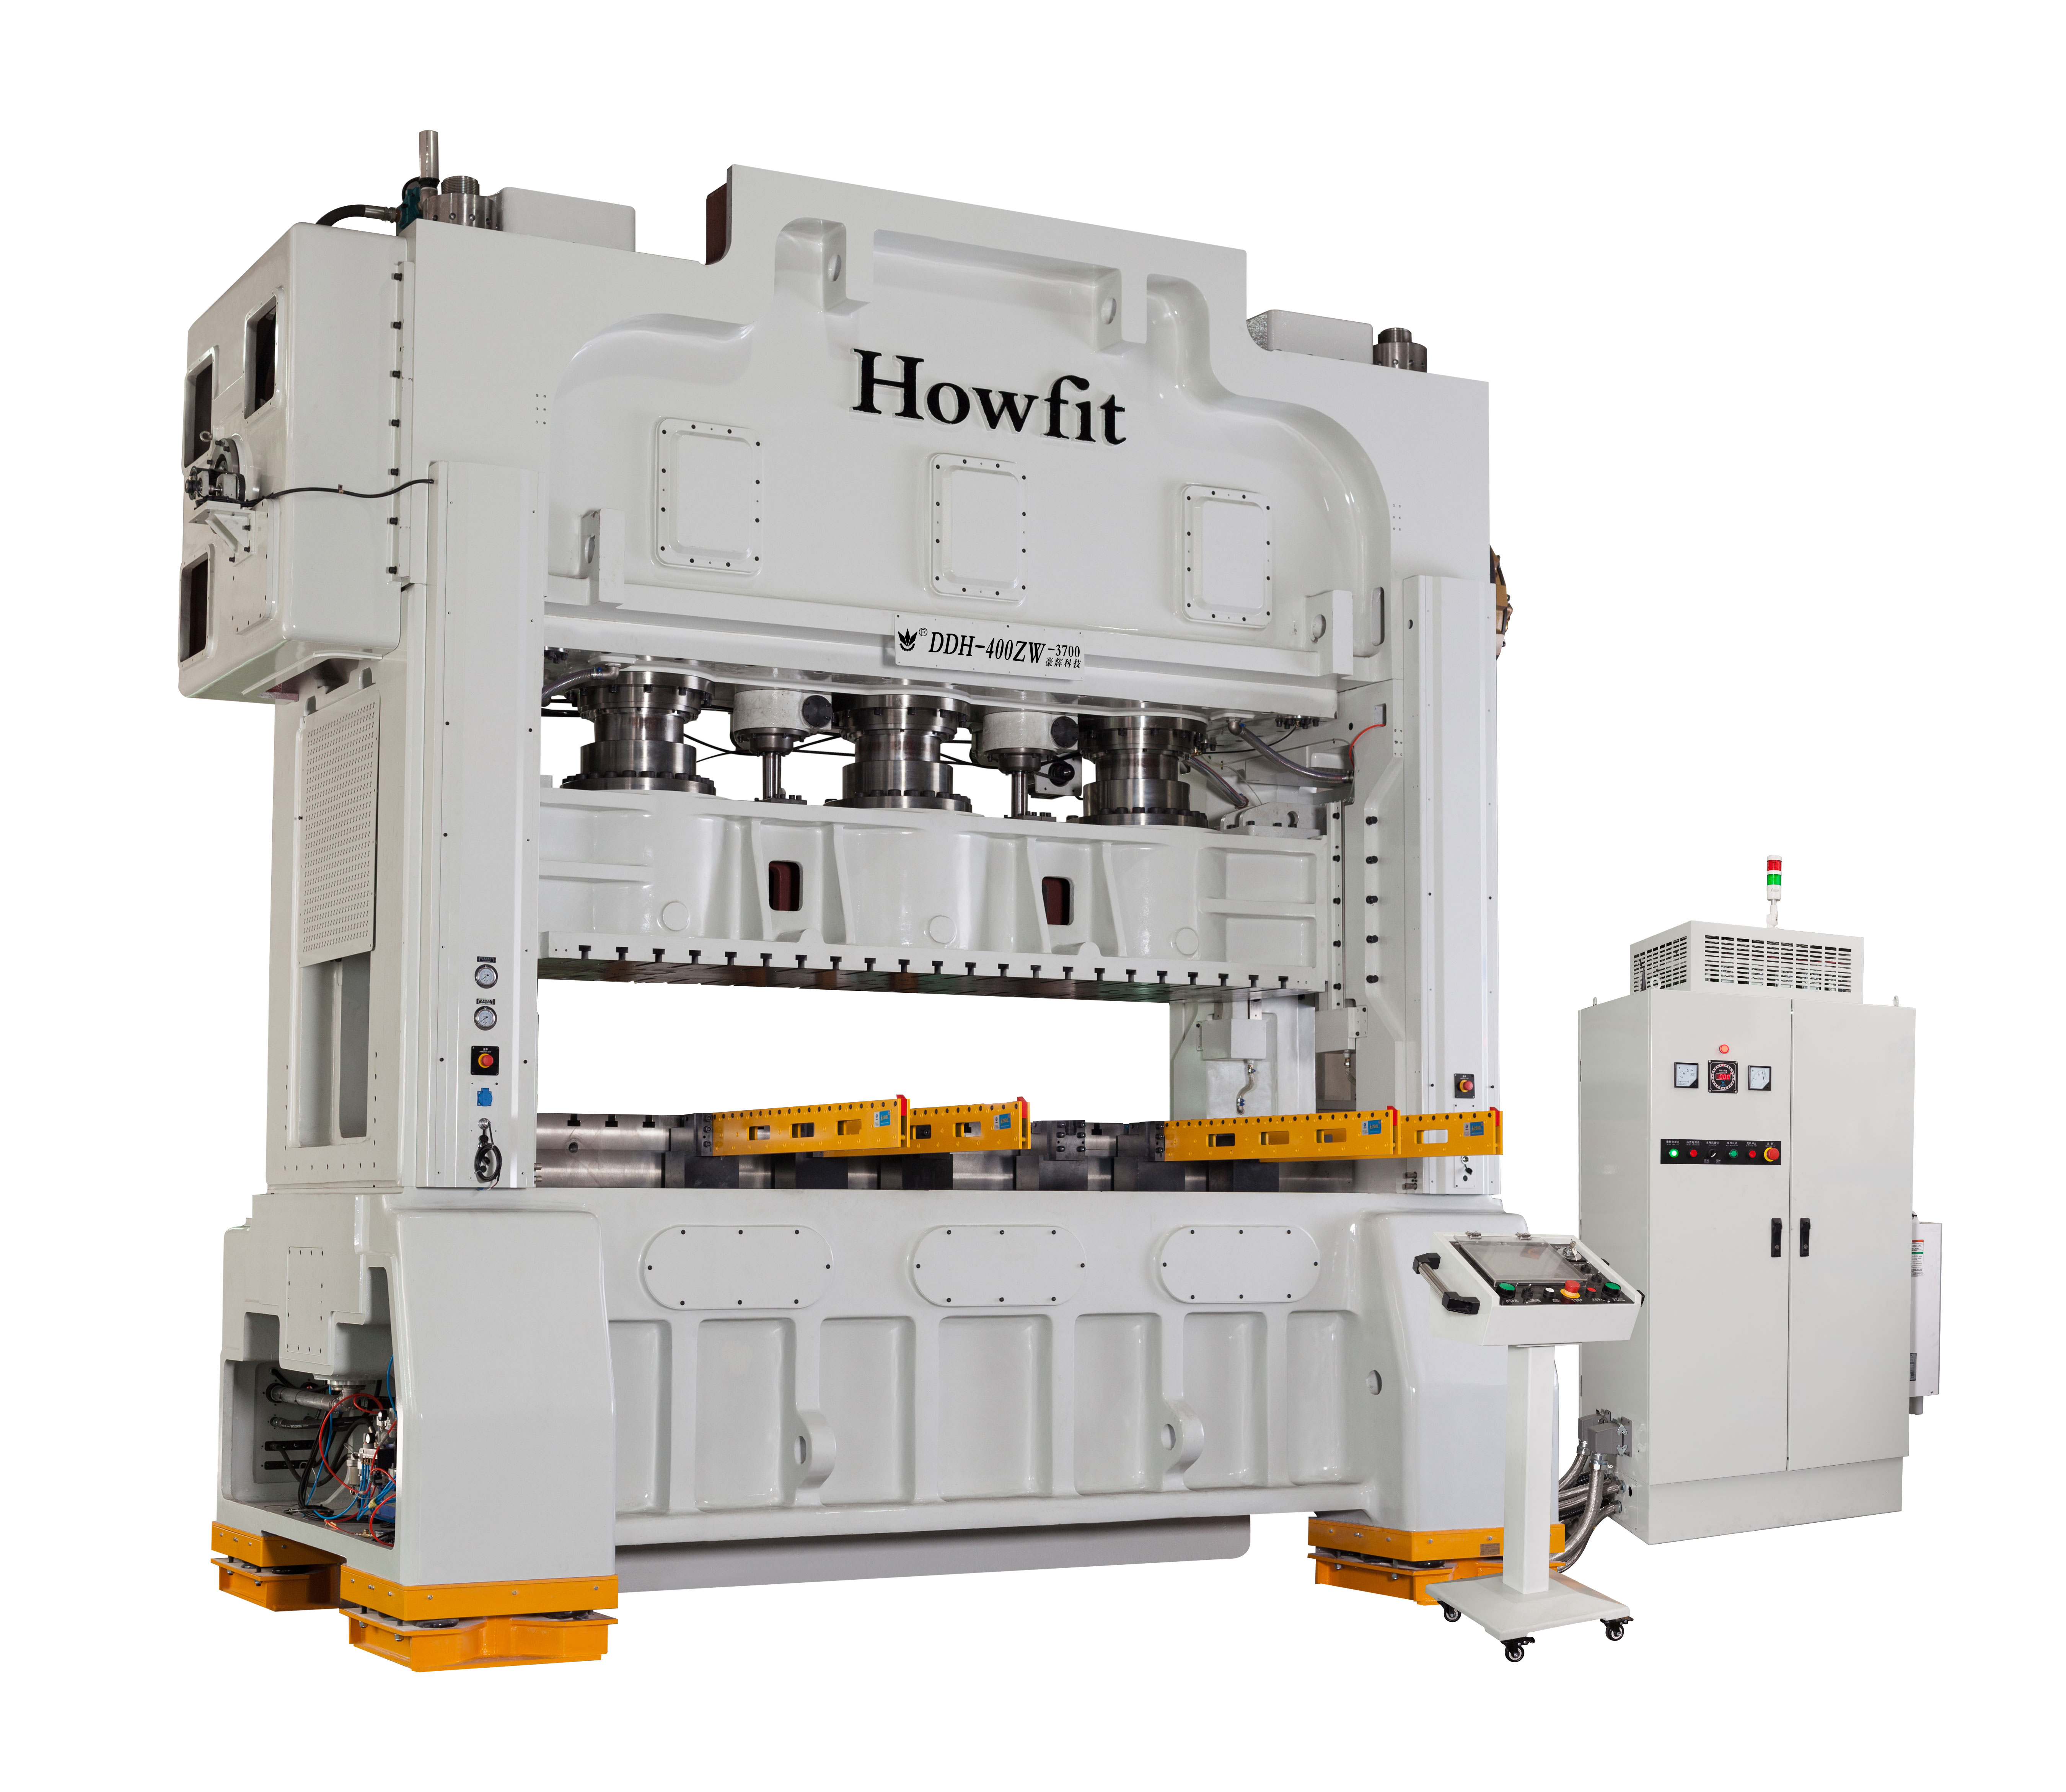 HOWFIT DDH 400T ZW-3700 High-Speed Precision Punch Press Technical Innovation and Configuration Analysis